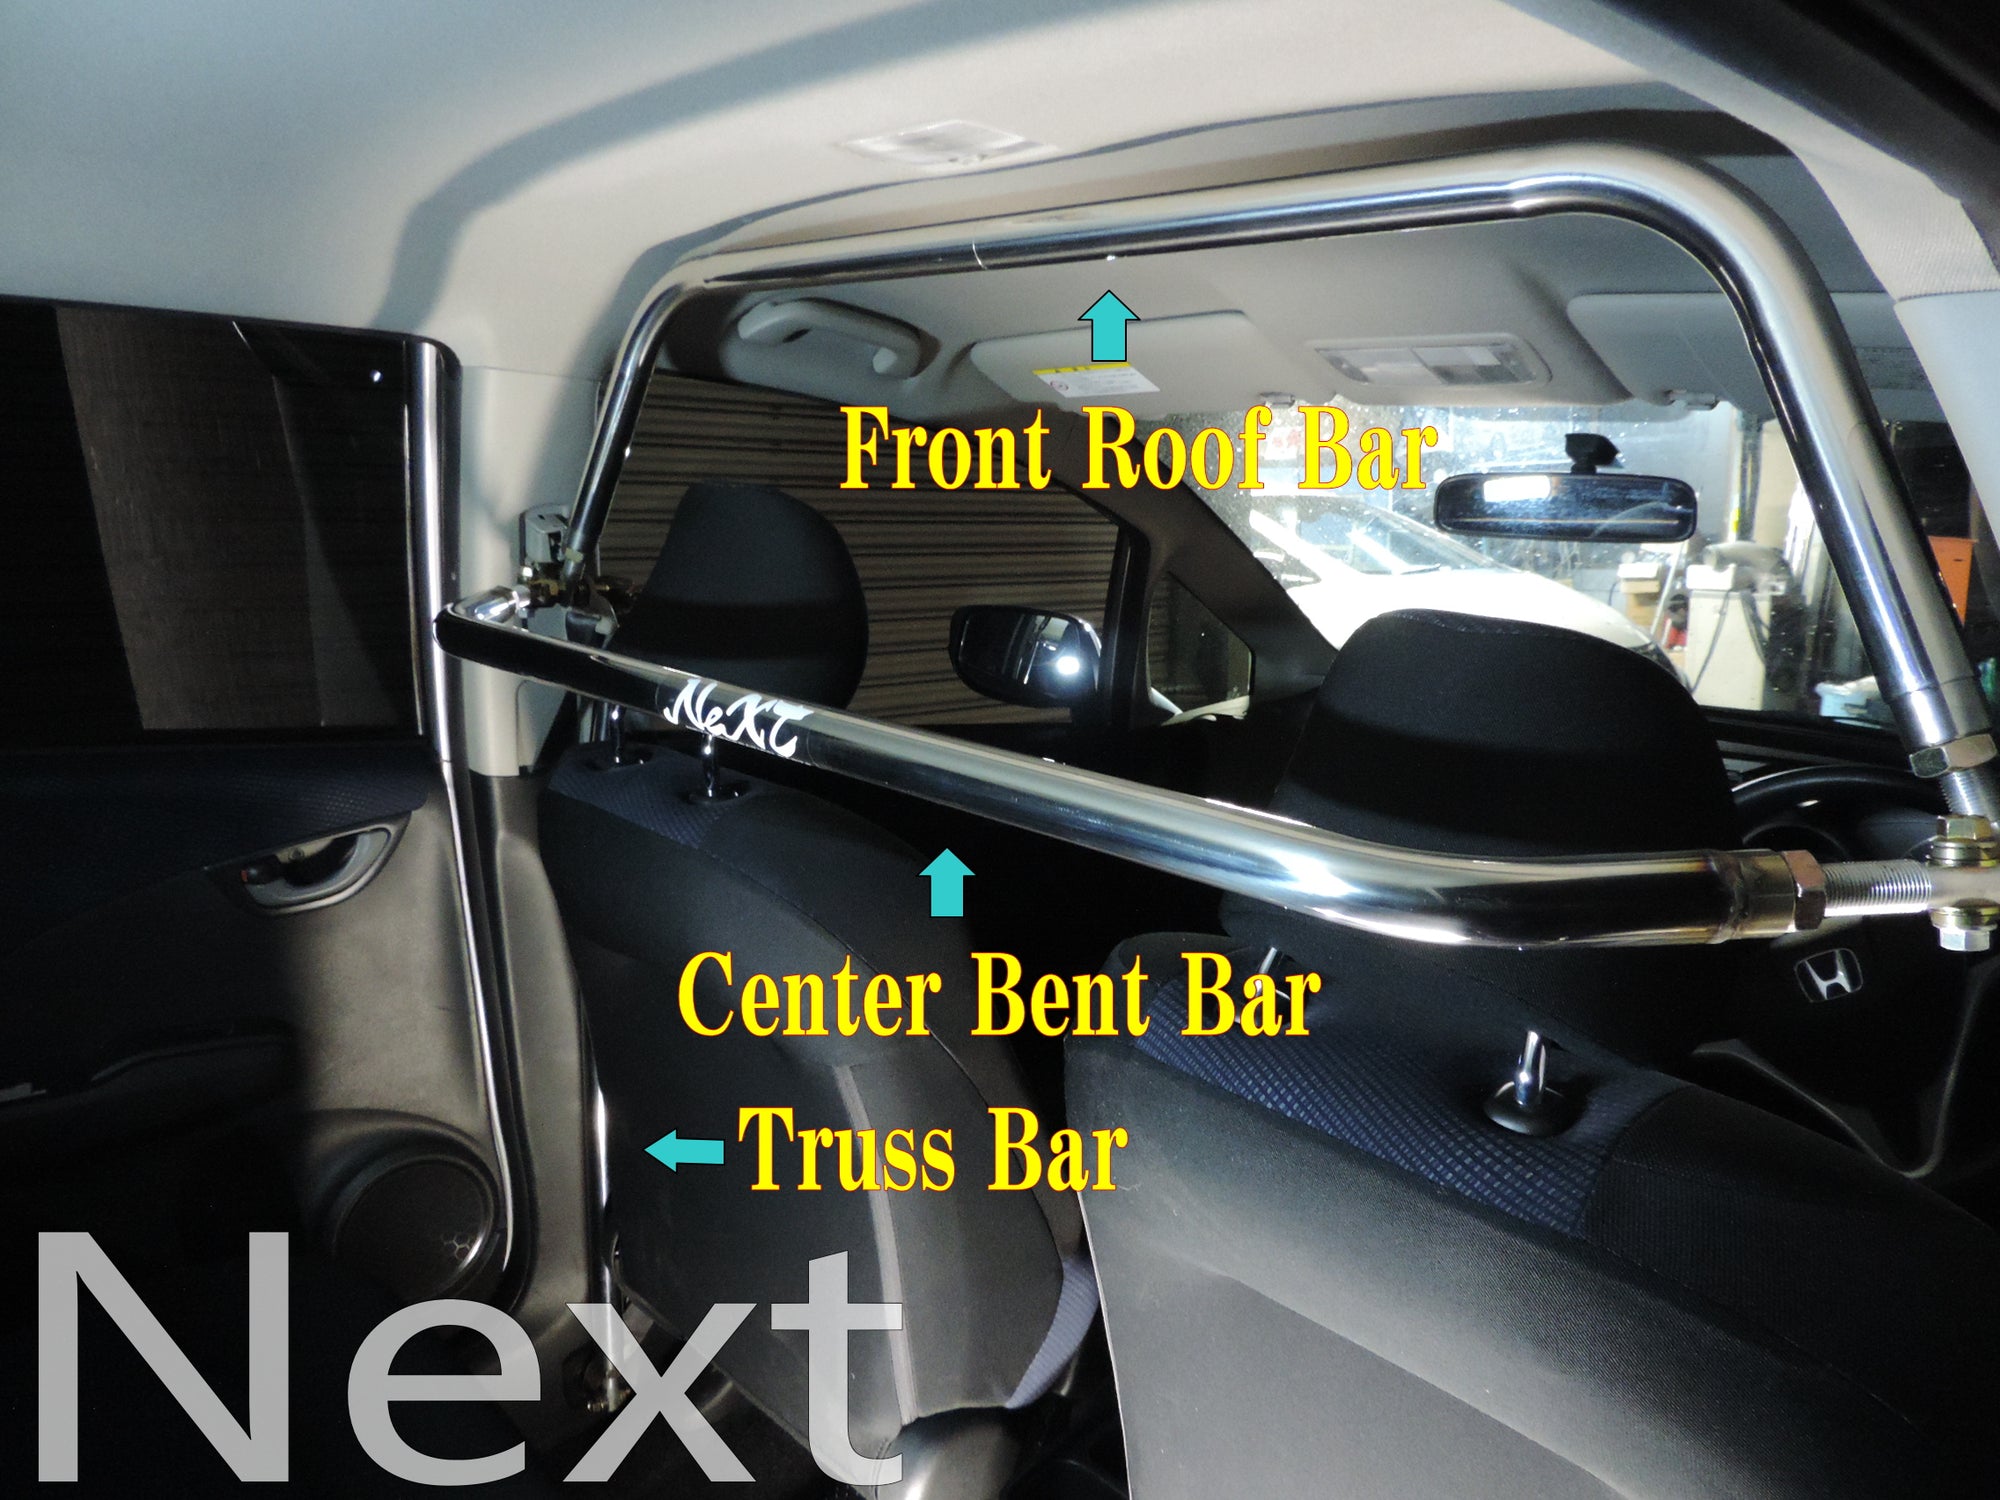 NEXT MIRACLE CROSS BAR FRONT ROOF BAR STAINLESS 35 FOR SUZUKI ALTO HA36 TYPE T F NEXT-01449